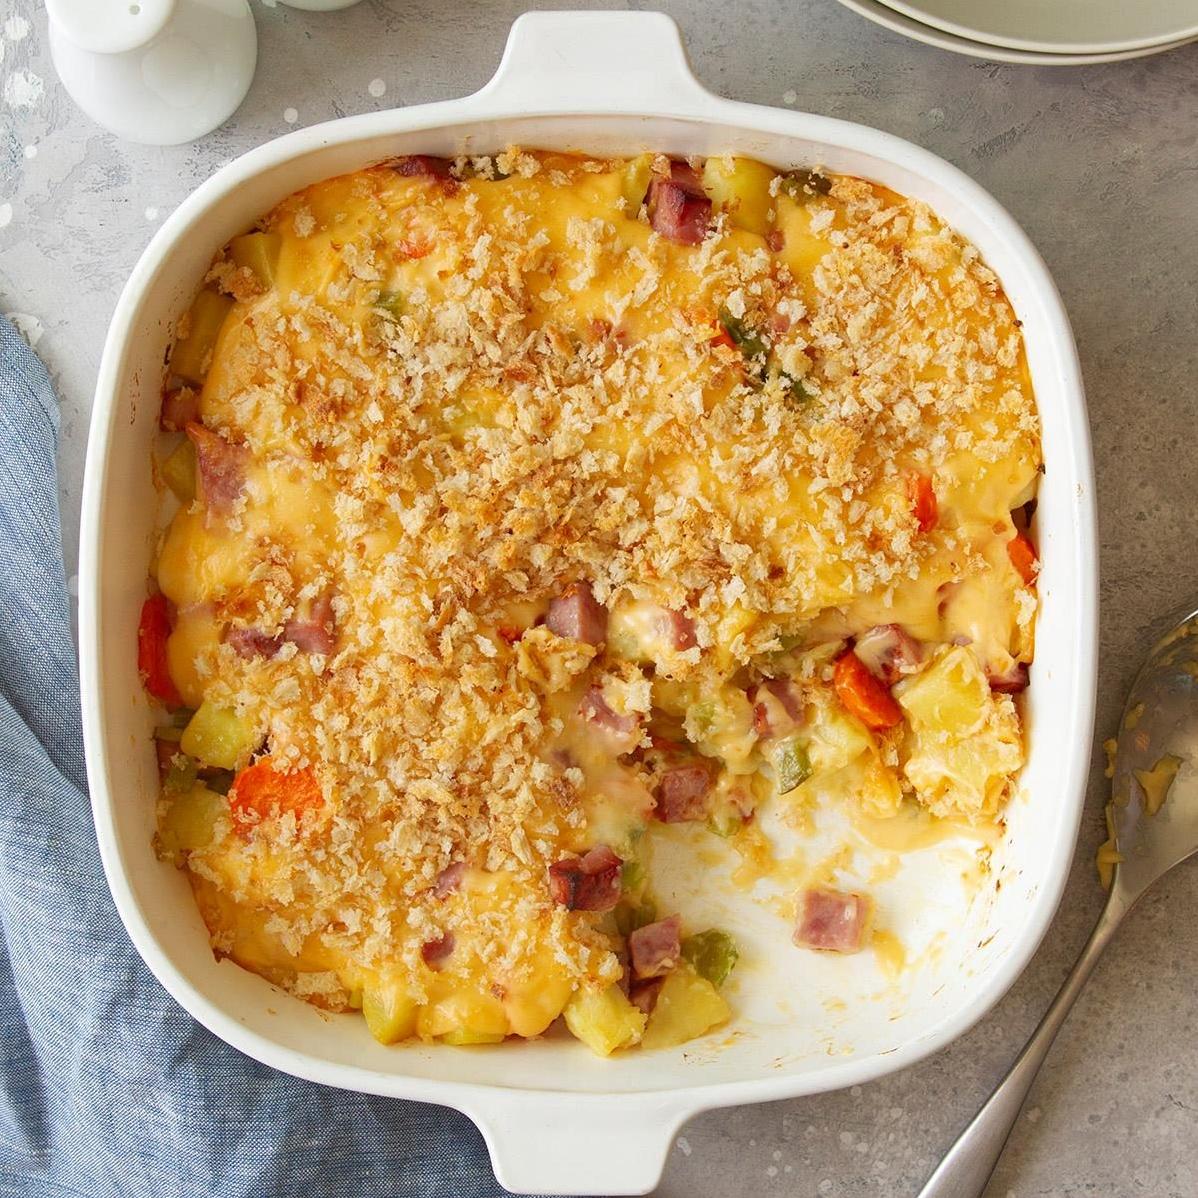  A hearty ham casserole that will satisfy the whole family.